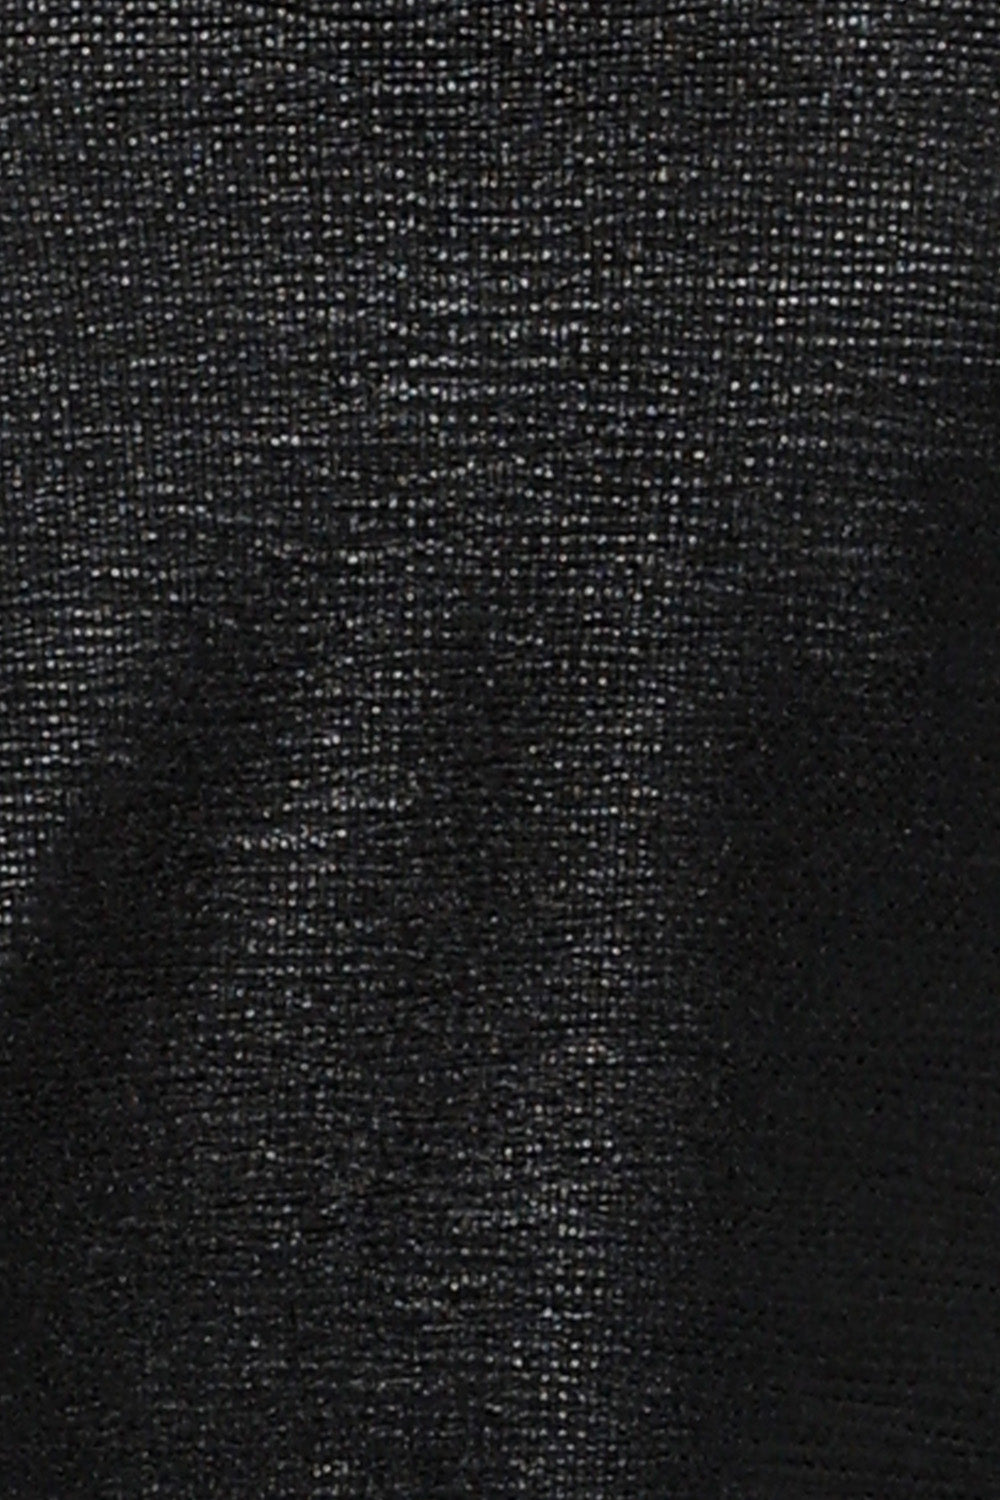 swatch of Australian and New Zealand fashion label L&F's black Xanadu fabric. Part of of our exclusive Up Late party collection, Black shimmer jersey is used for stylish Australian made tops, skirts and accessories in sizes 8-24. 